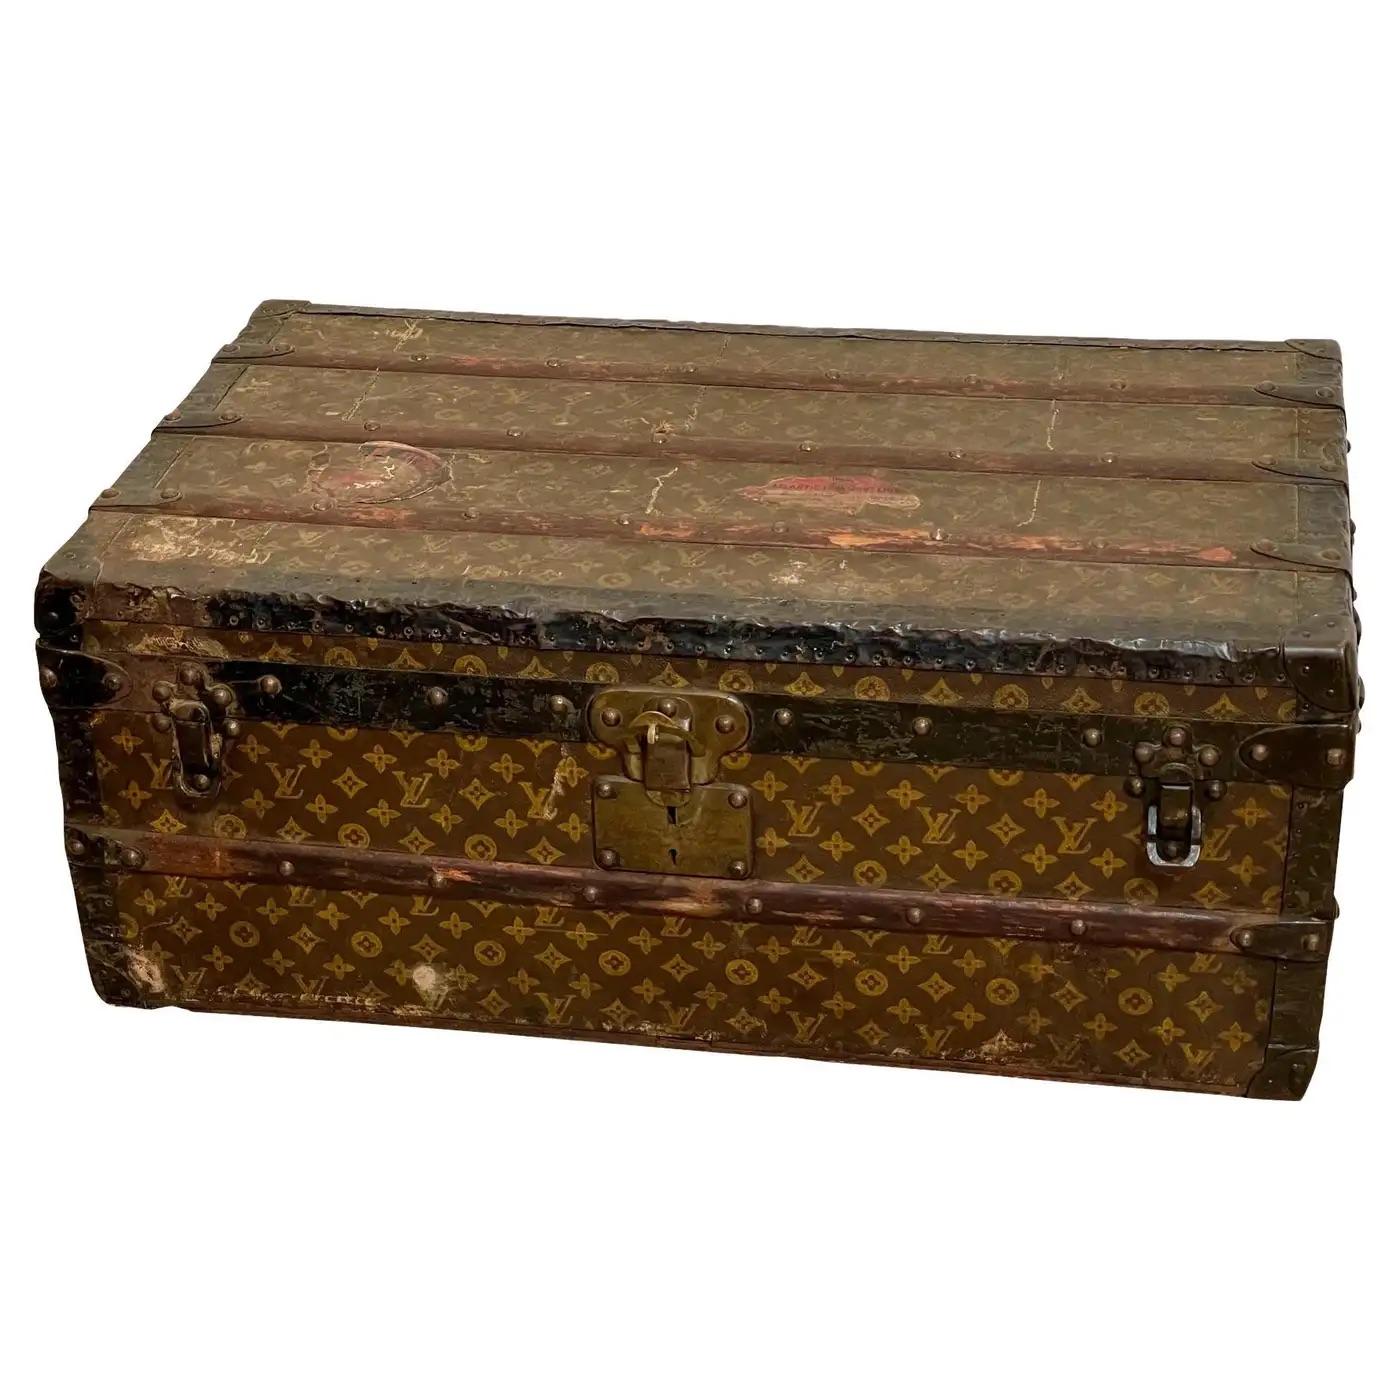 Wood Early Louis Vuitton Steamer Trunk, C. 1910 For Sale